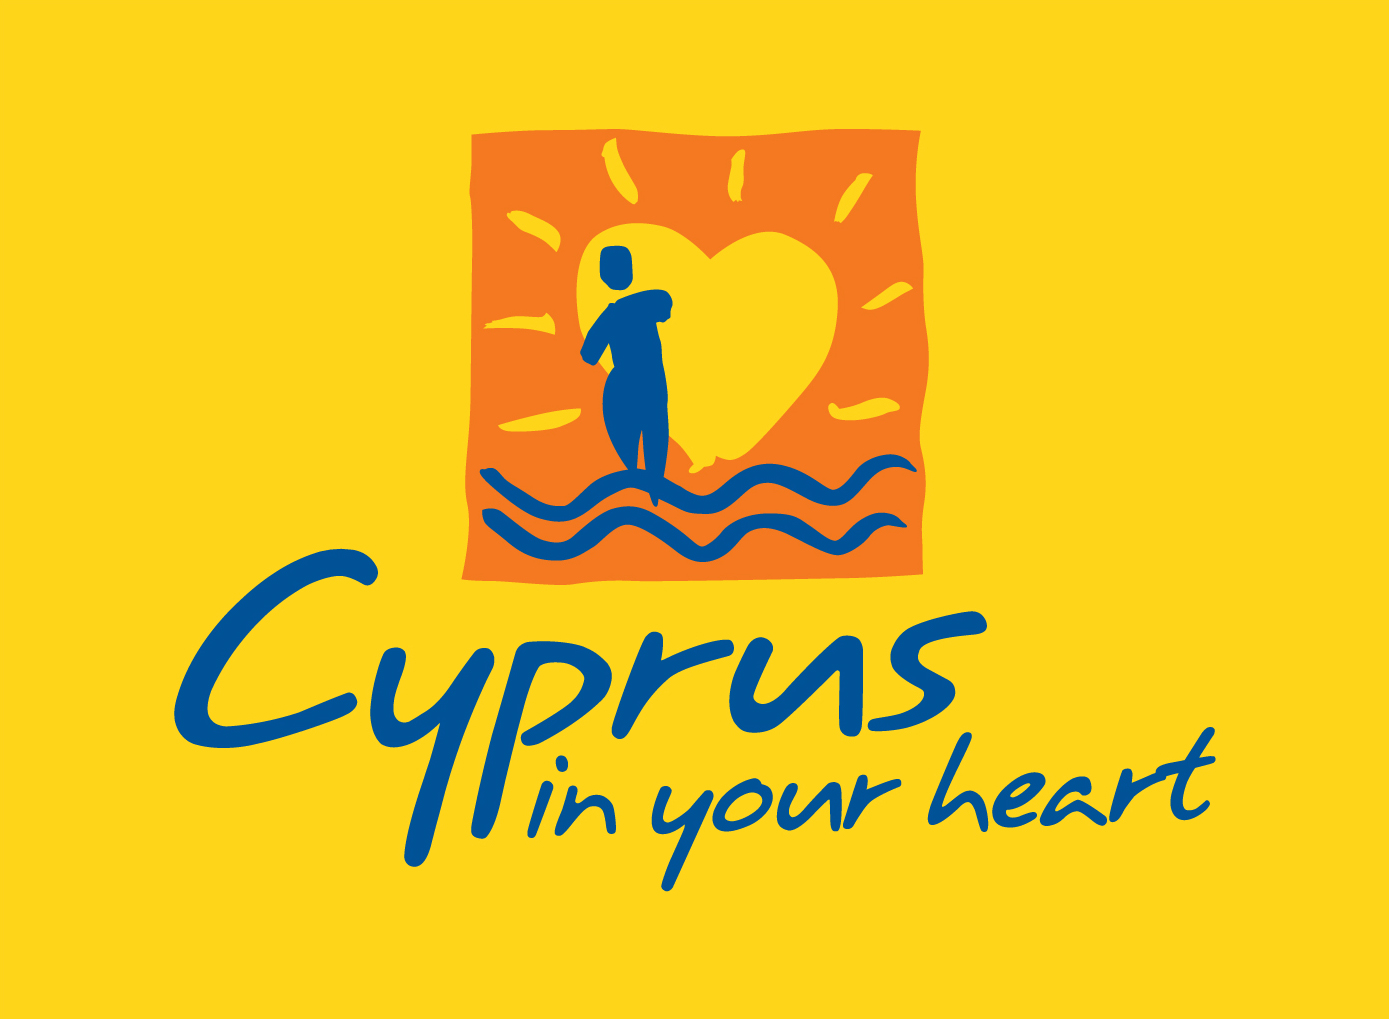 Cyprus in your heart